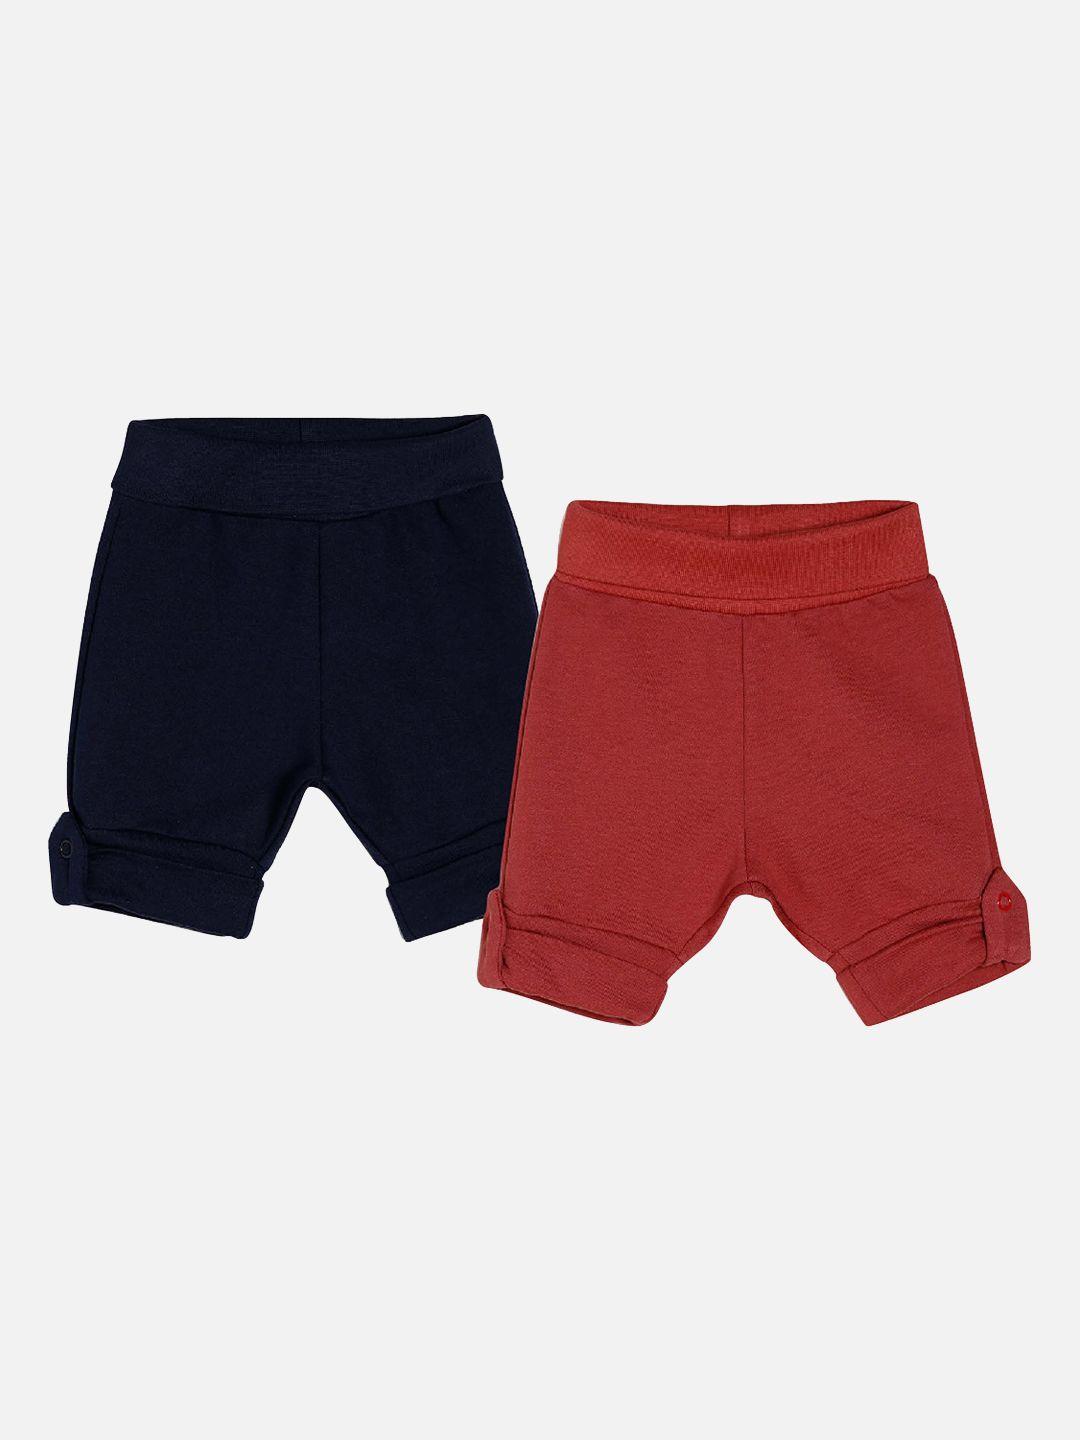 baesd kids pack of 2 sports shorts